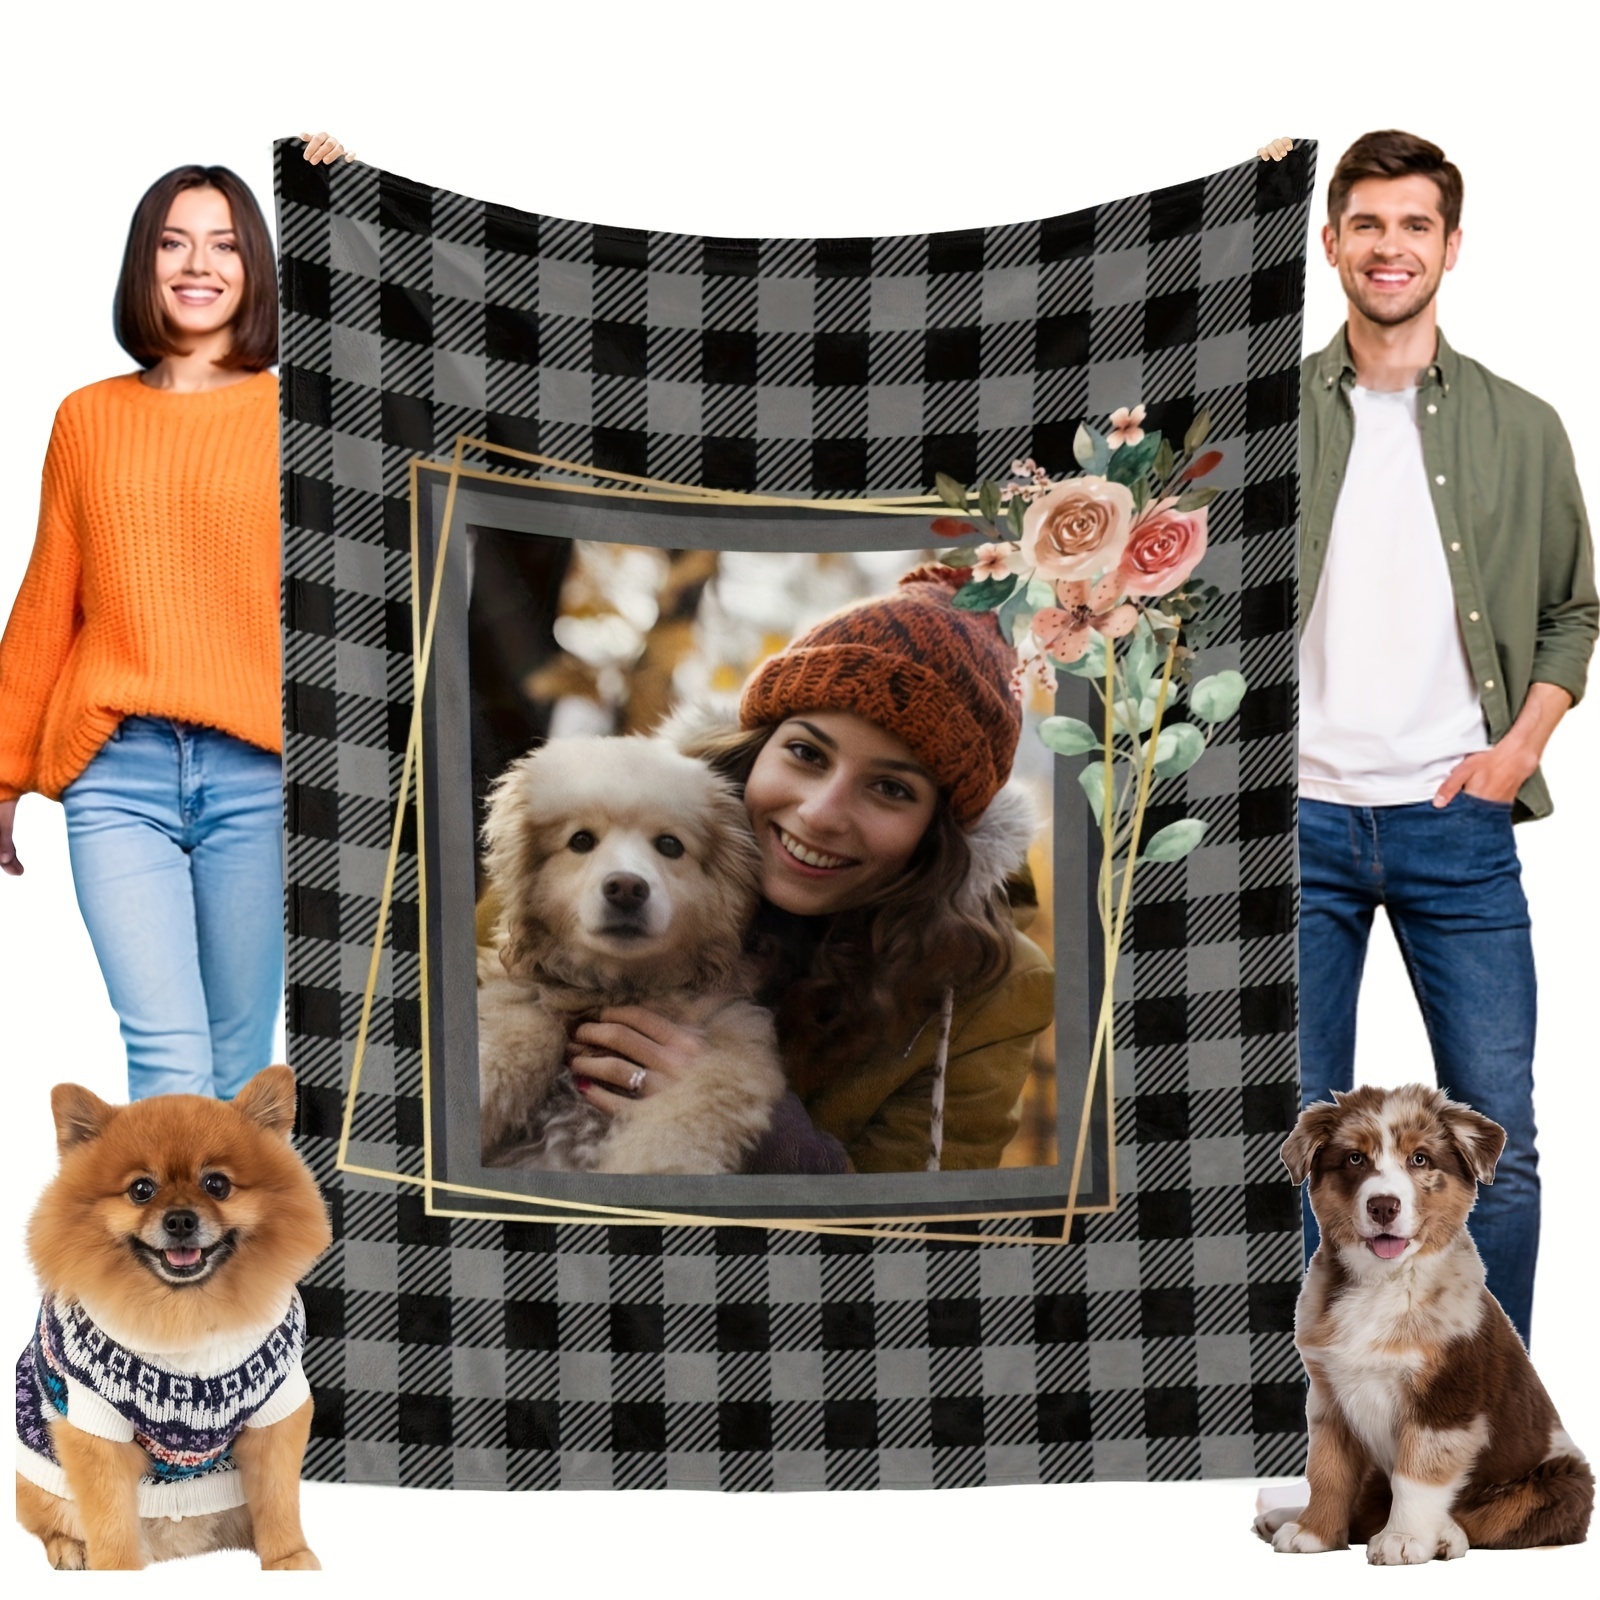 

1pc Custom Pet Flannel Blanket, Cute Plaid Flower Print Warm Soft Dog Throw Blanket, Personalized Photo Blanket, Machine Washable Dog Mat For Bed Crate Couch